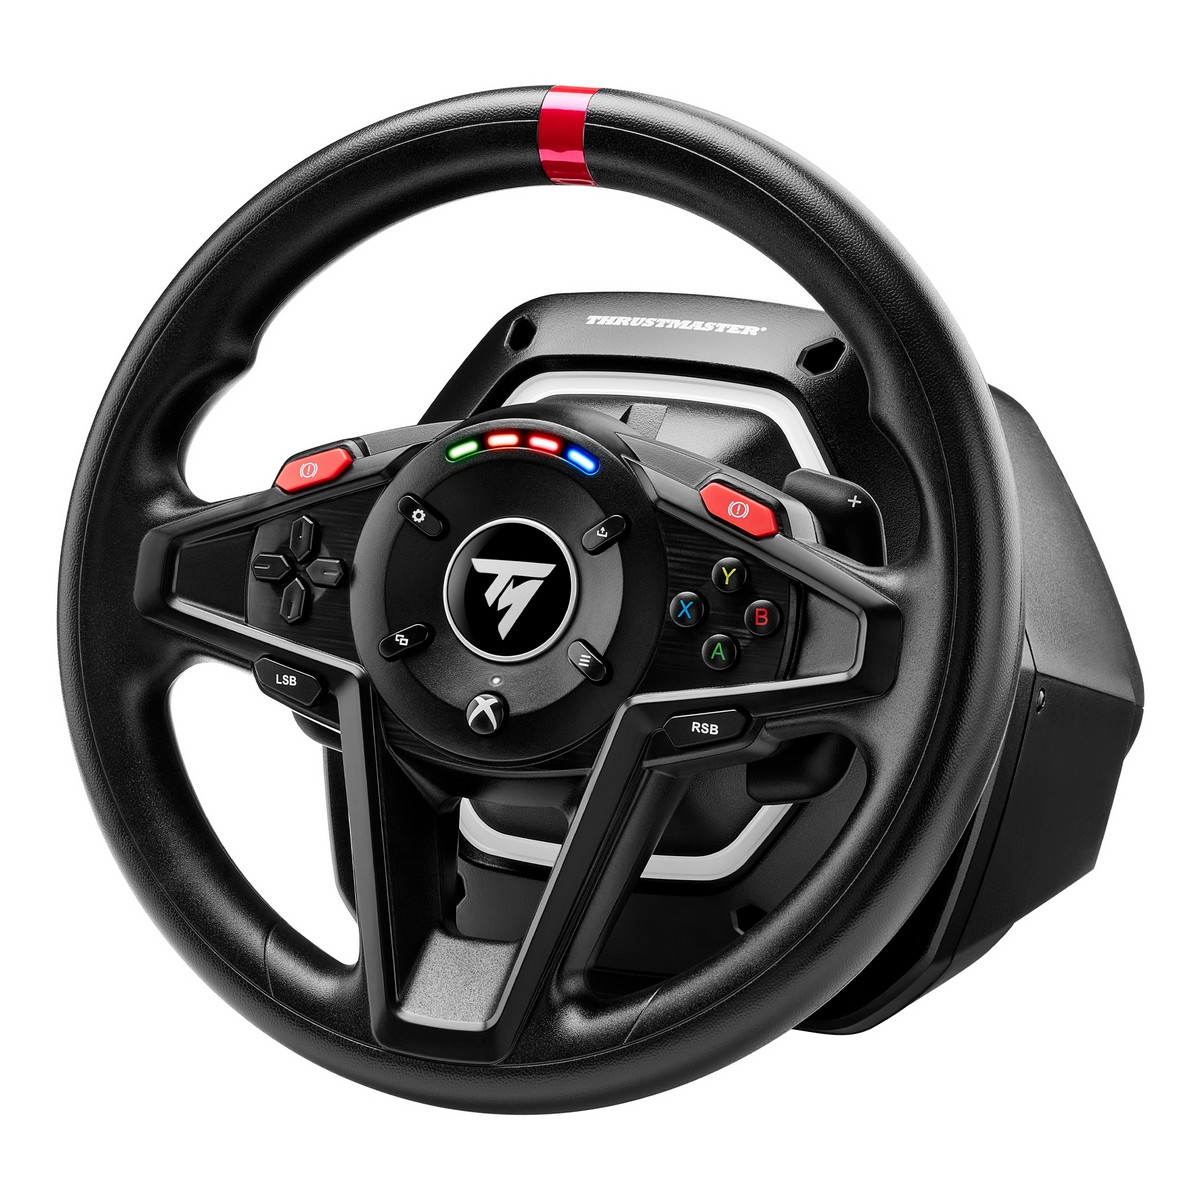 Thrustmaster T-128 Xbox Series X/S Steering Wheel and Pedal Set (PC/Xbox, 4468011)